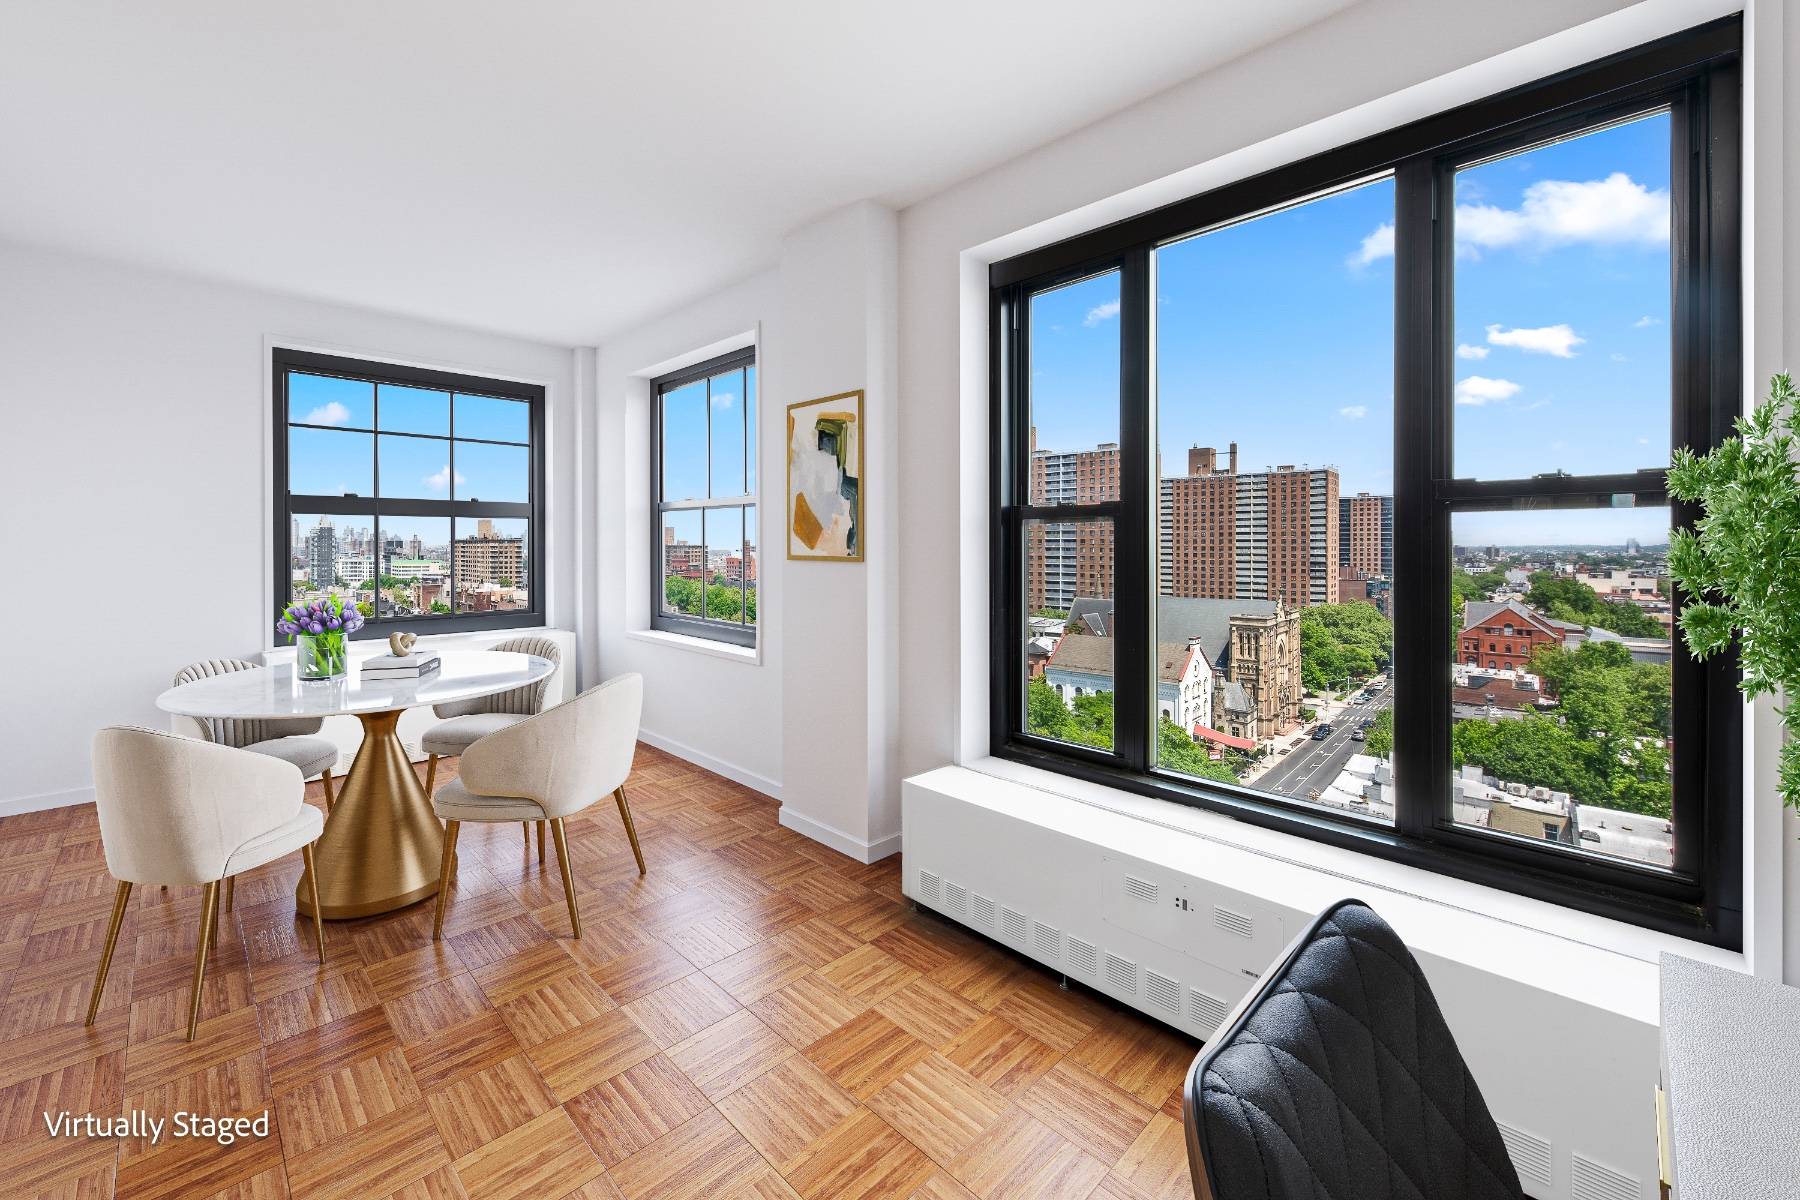 This sun drenched convertible 2 bedroom corner apartment, perched atop the iconic Clinton Hill Co ops, features expansive, unobstructed views of the city.